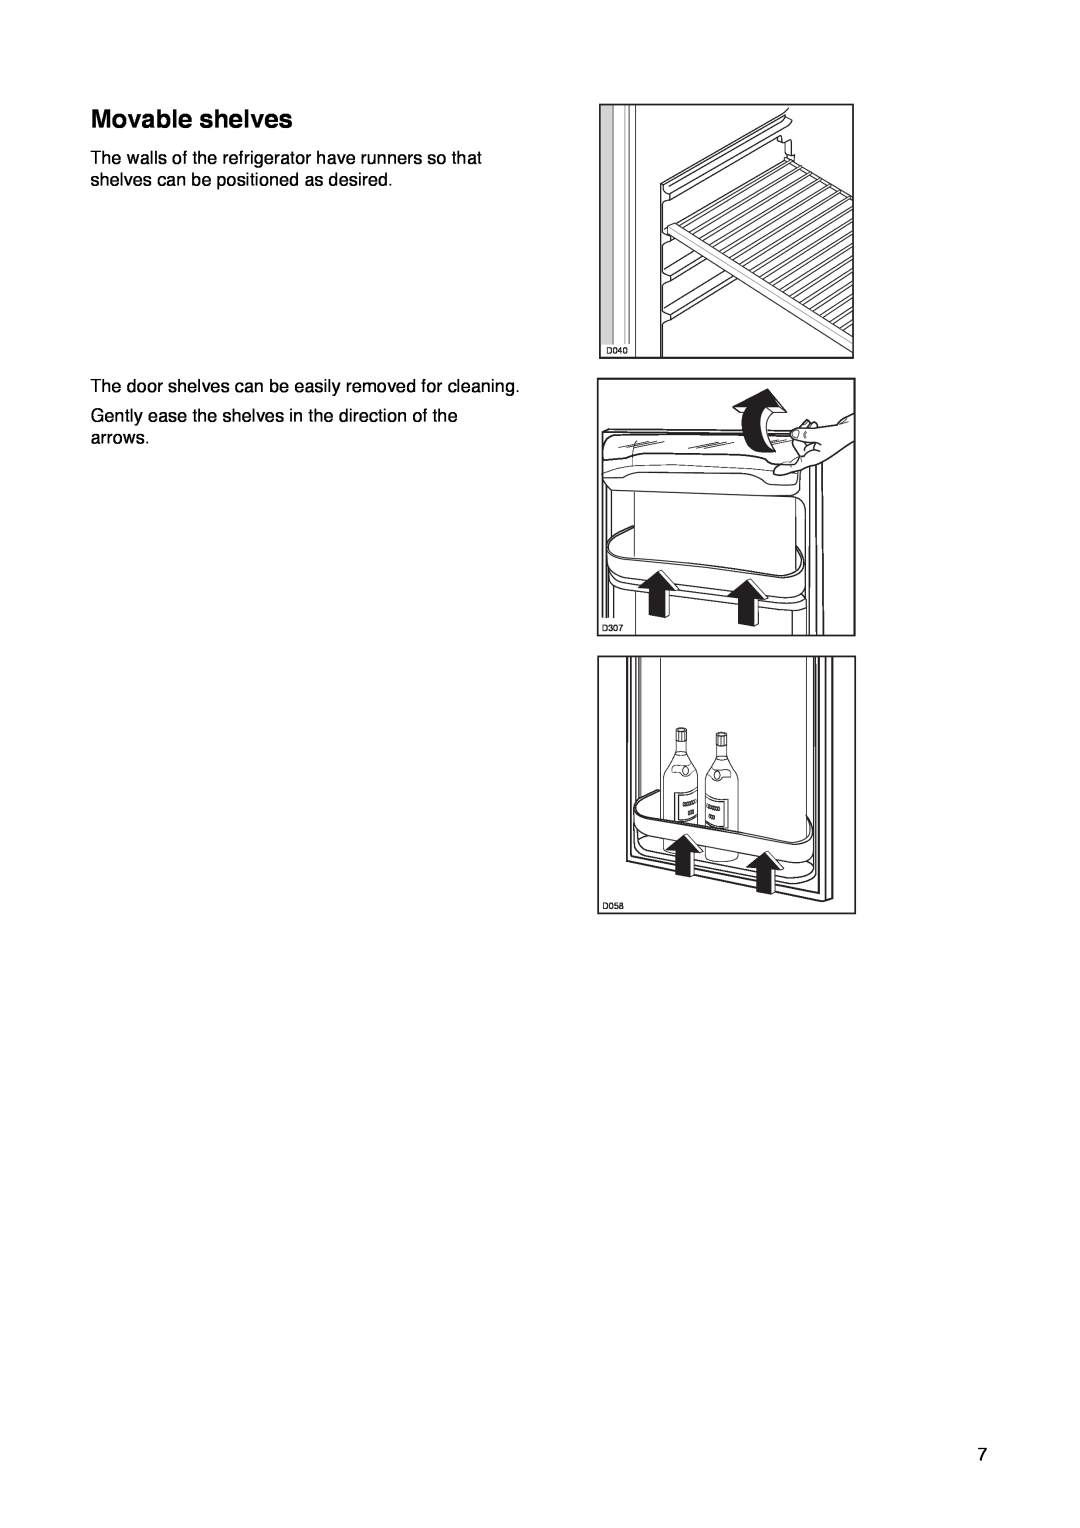 Zanussi ZK 57/38 R manual Movable shelves, The door shelves can be easily removed for cleaning, D040, D307, D058 